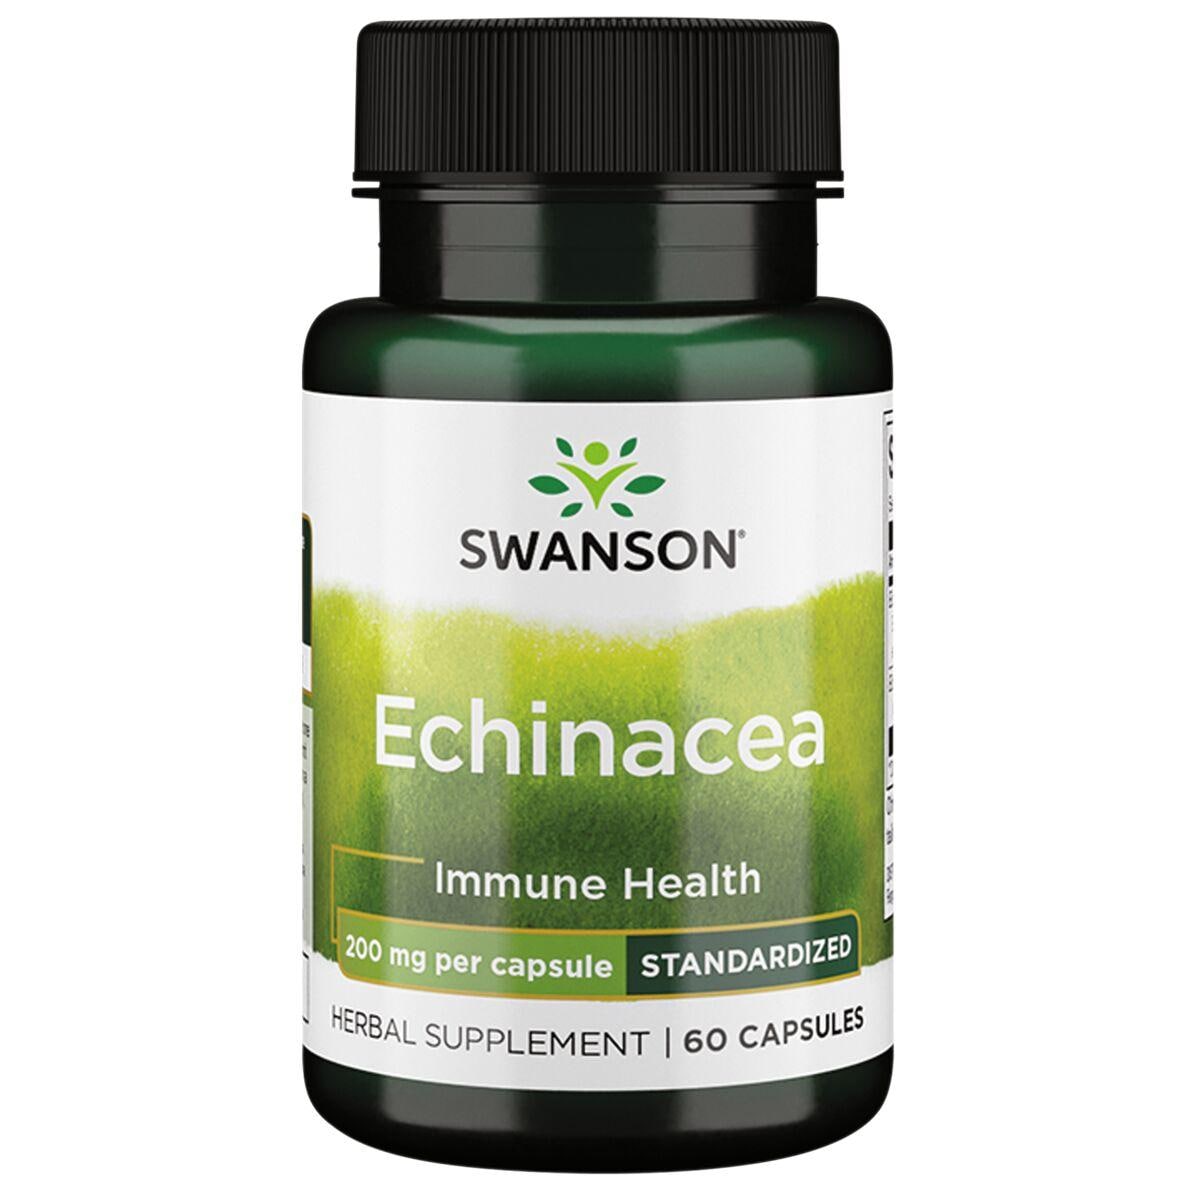 Swanson Superior Herbs Echinacea - Standardized Vitamin 200 mg 60 Caps Herbs and Supplements